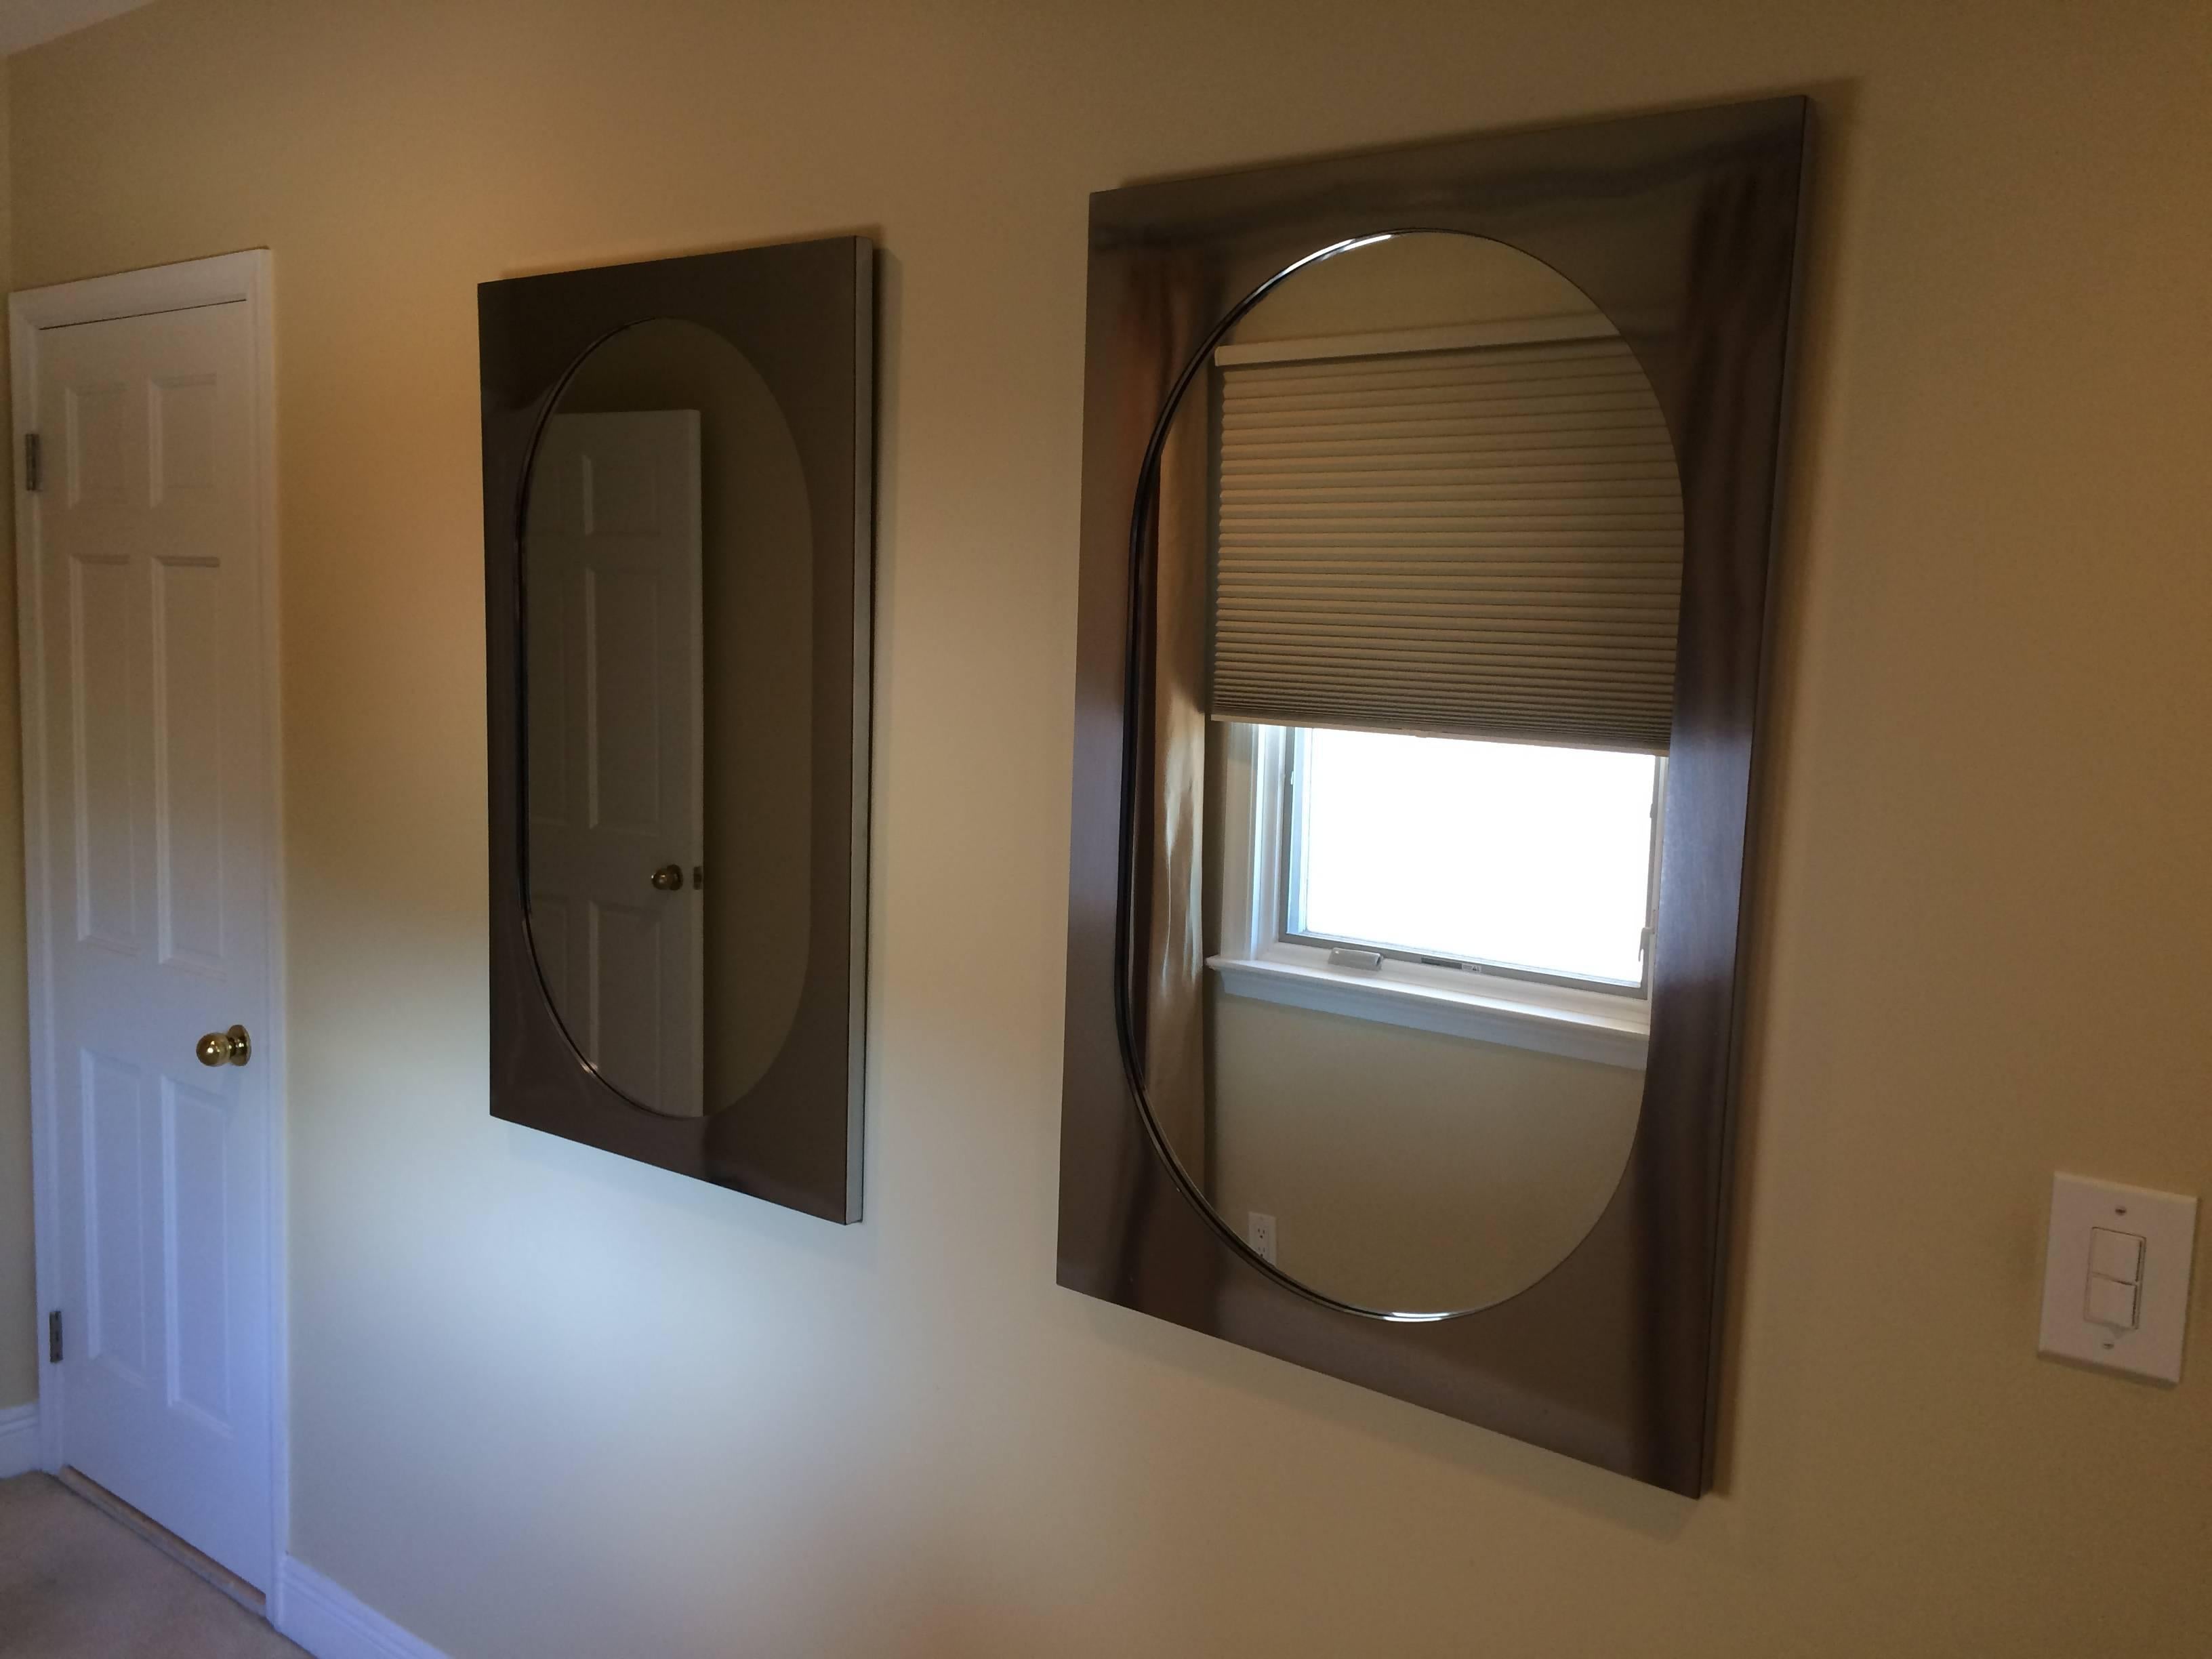 Pair of great wall mirrors, USA, 1970s.